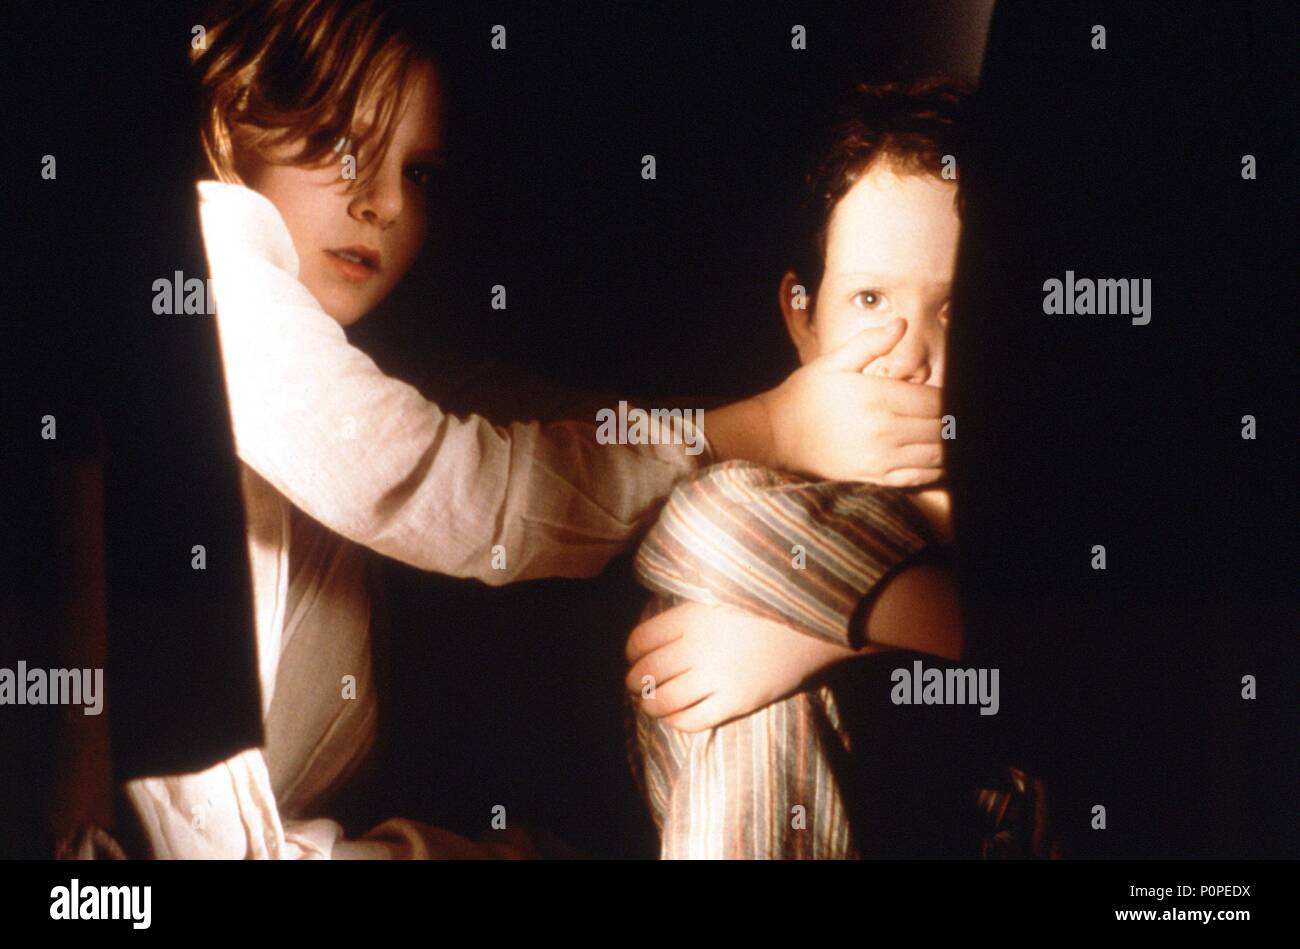 Original Film Title: THE OTHERS.  English Title: THE OTHERS.  Film Director: ALEJANDRO AMENABAR.  Year: 2001.  Stars: ALAKINA MANN; JAMES BENTLEY. Copyright: Editorial inside use only. This is a publicly distributed handout. Access rights only, no license of copyright provided. Mandatory authorization to Visual Icon (www.visual-icon.com) is required for the reproduction of this image. Credit: DIMENSION FILMS / Album Stock Photo